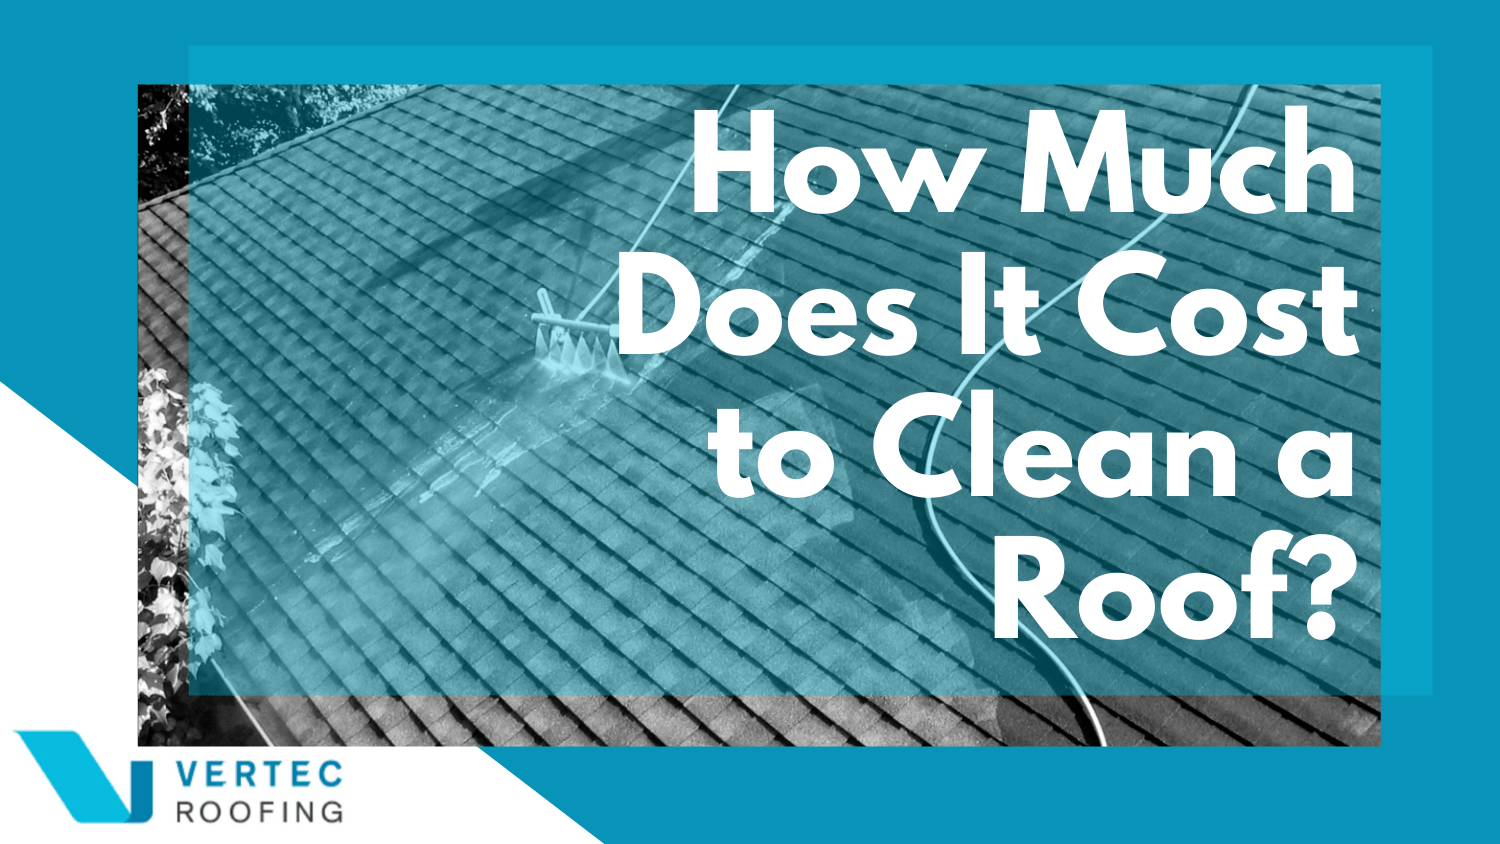 How Much Does It Cost to Clean a Roof